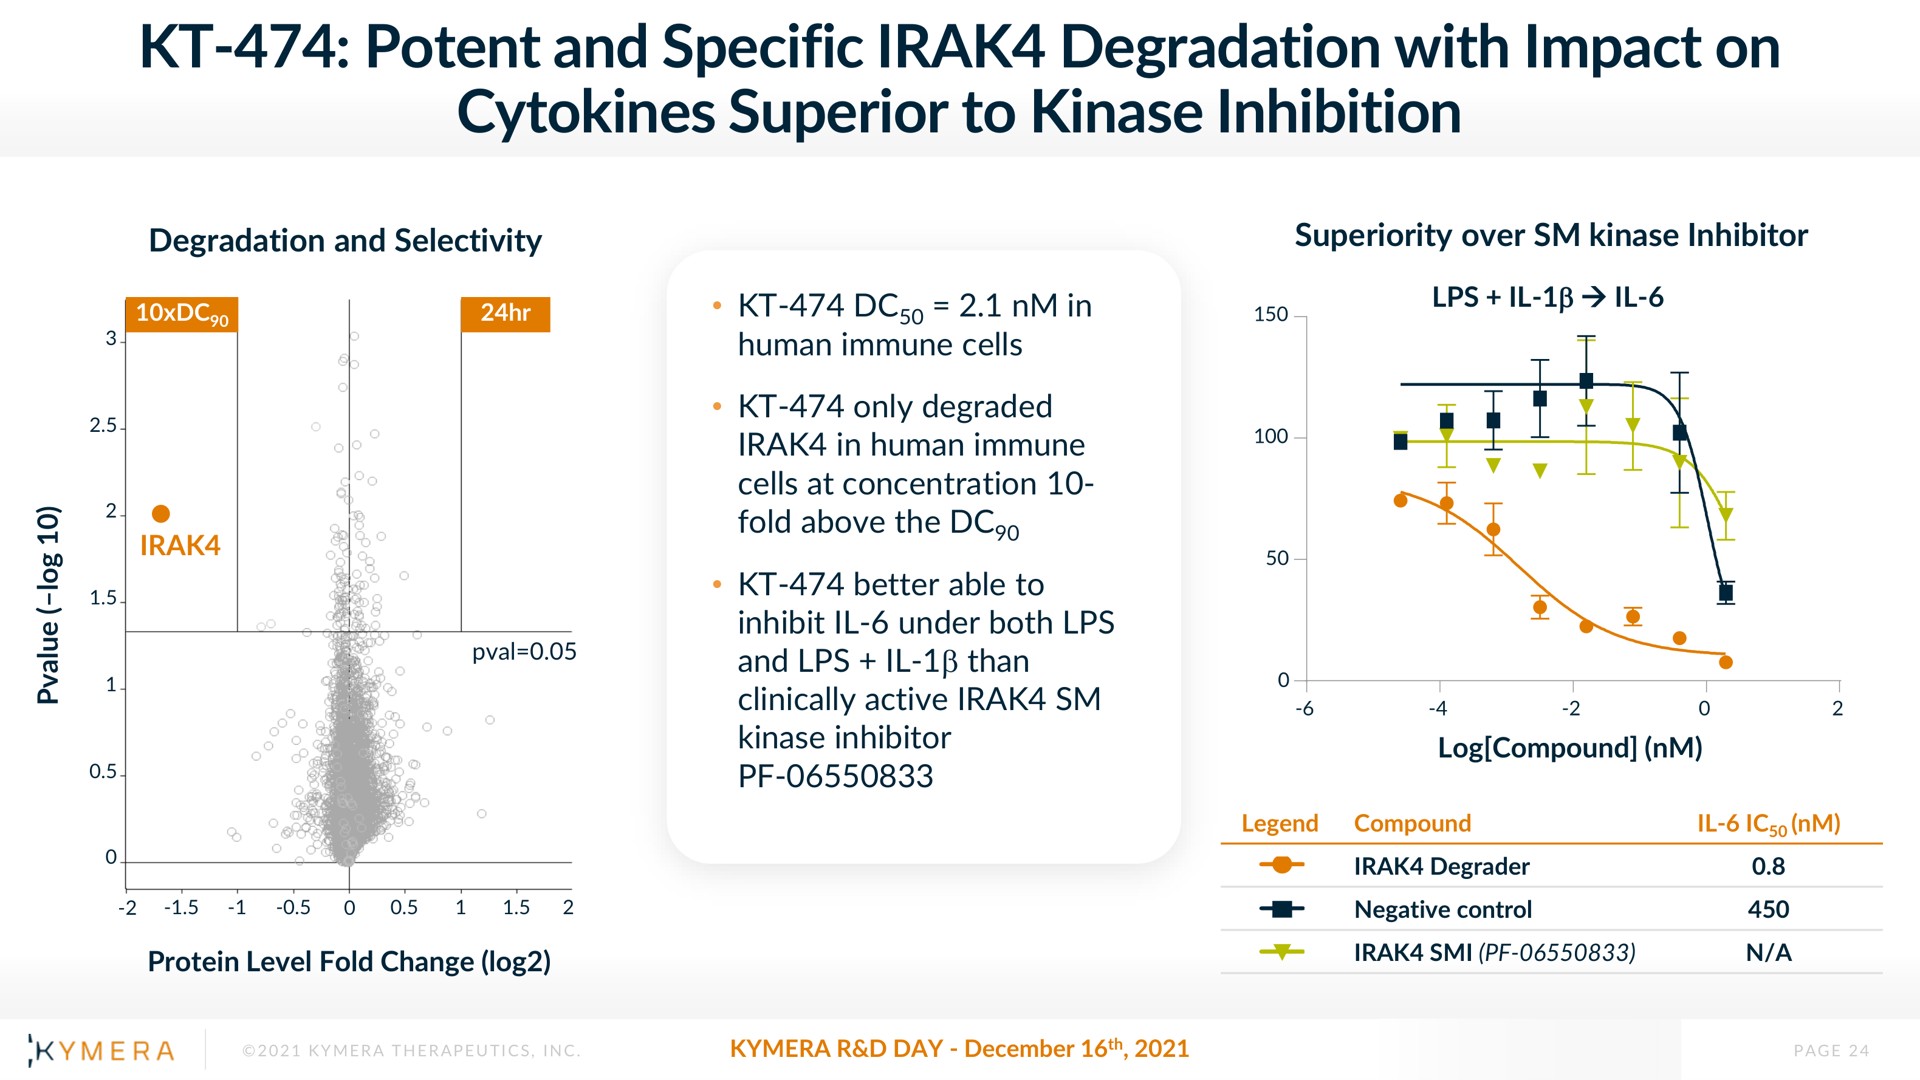 potent and specific degradation with impact on superior to kinase inhibition | Kymera